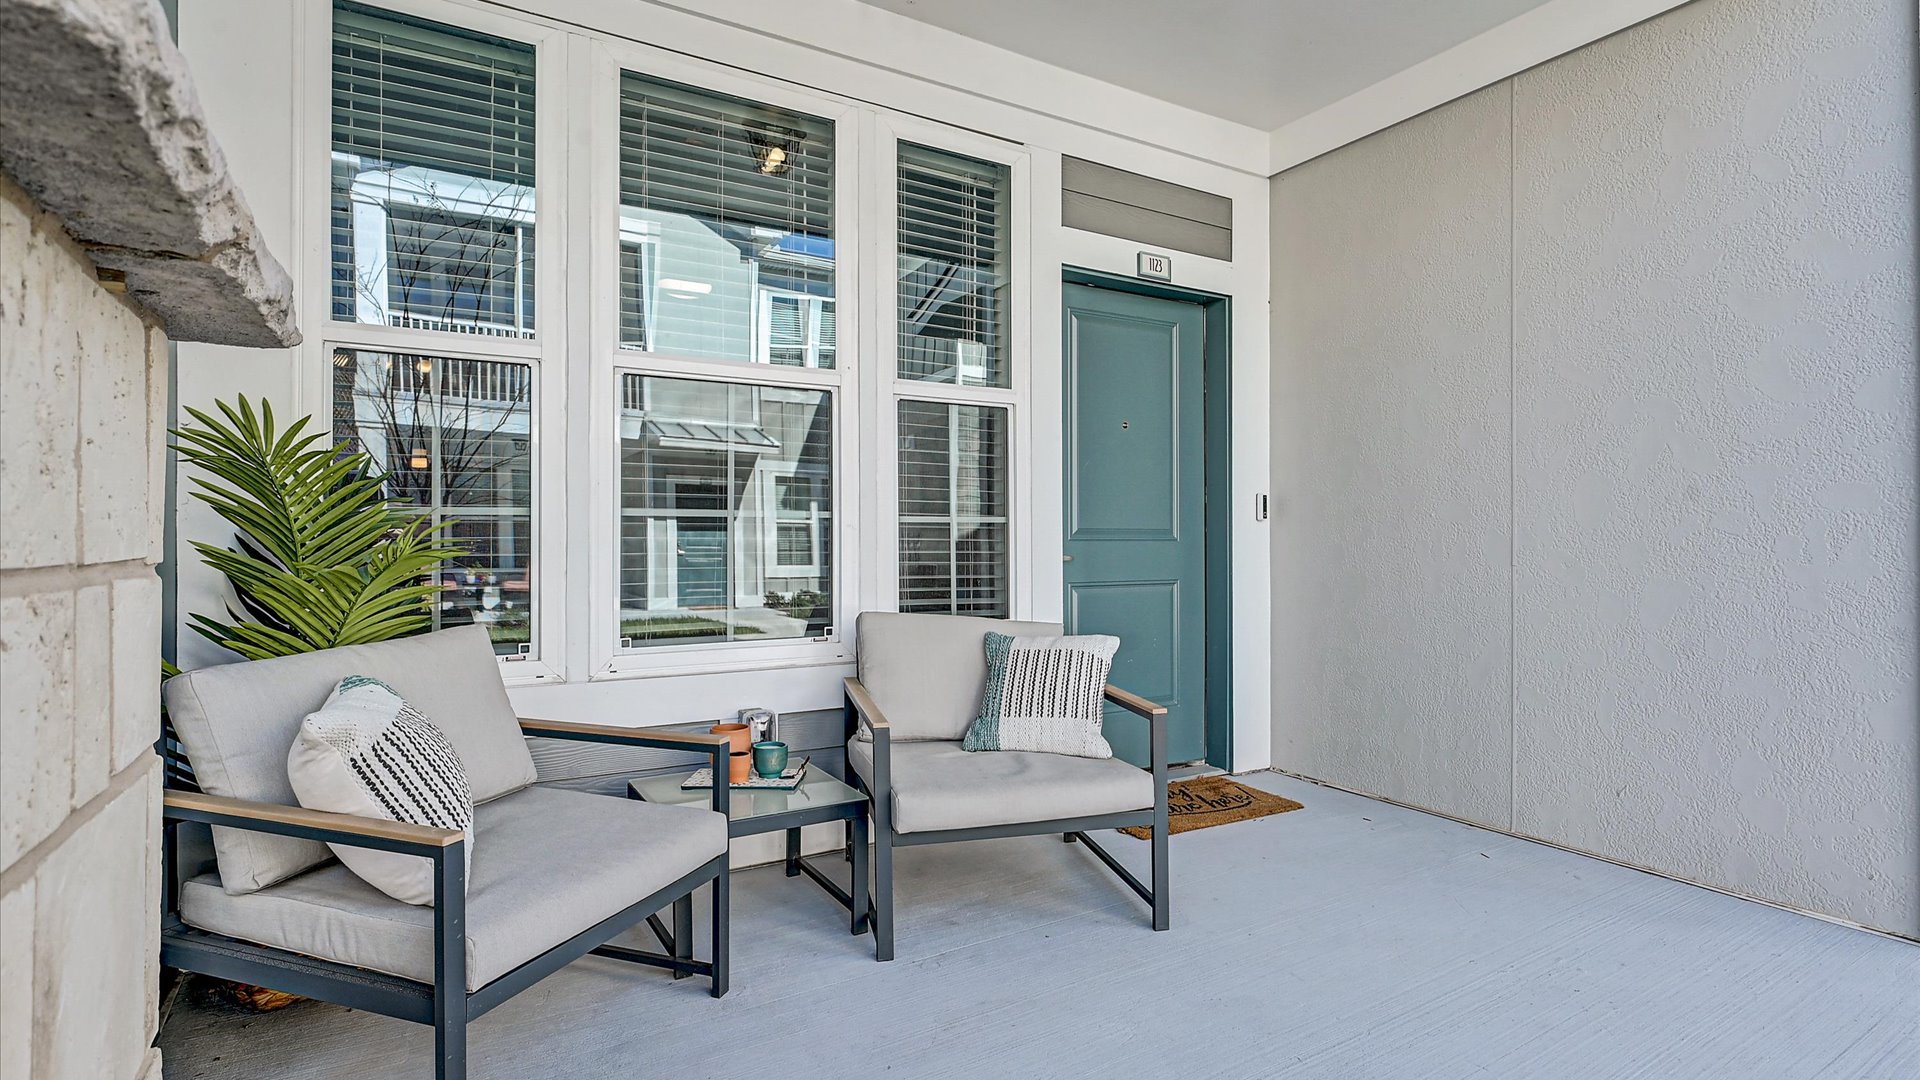 Porch with Chairs and Blue Door Springs at Flagler Center Apartments in Jacksonville, FL